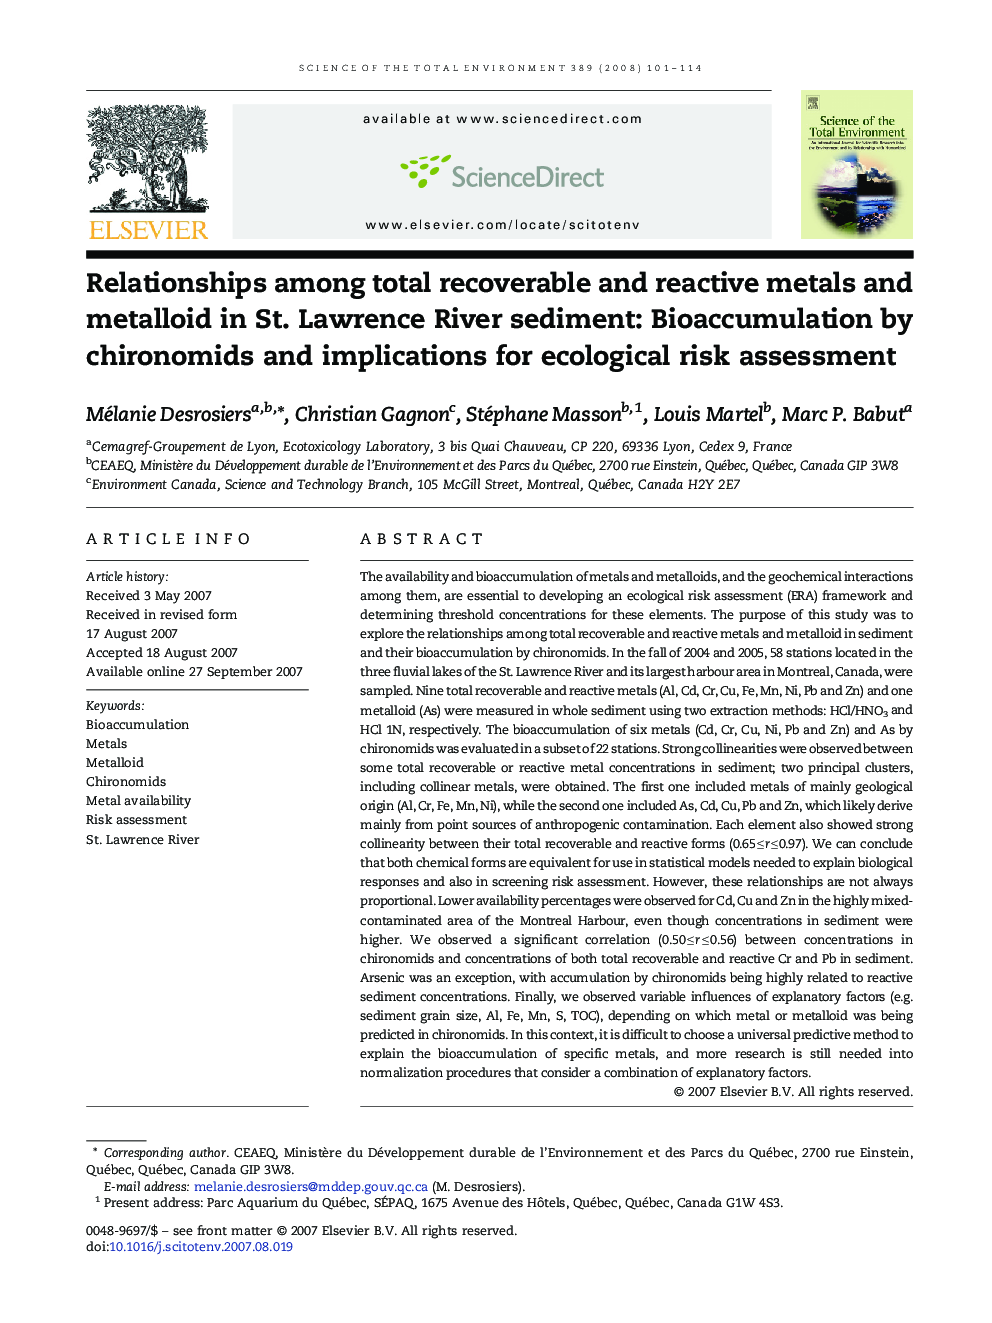 Relationships among total recoverable and reactive metals and metalloid in St. Lawrence River sediment: Bioaccumulation by chironomids and implications for ecological risk assessment